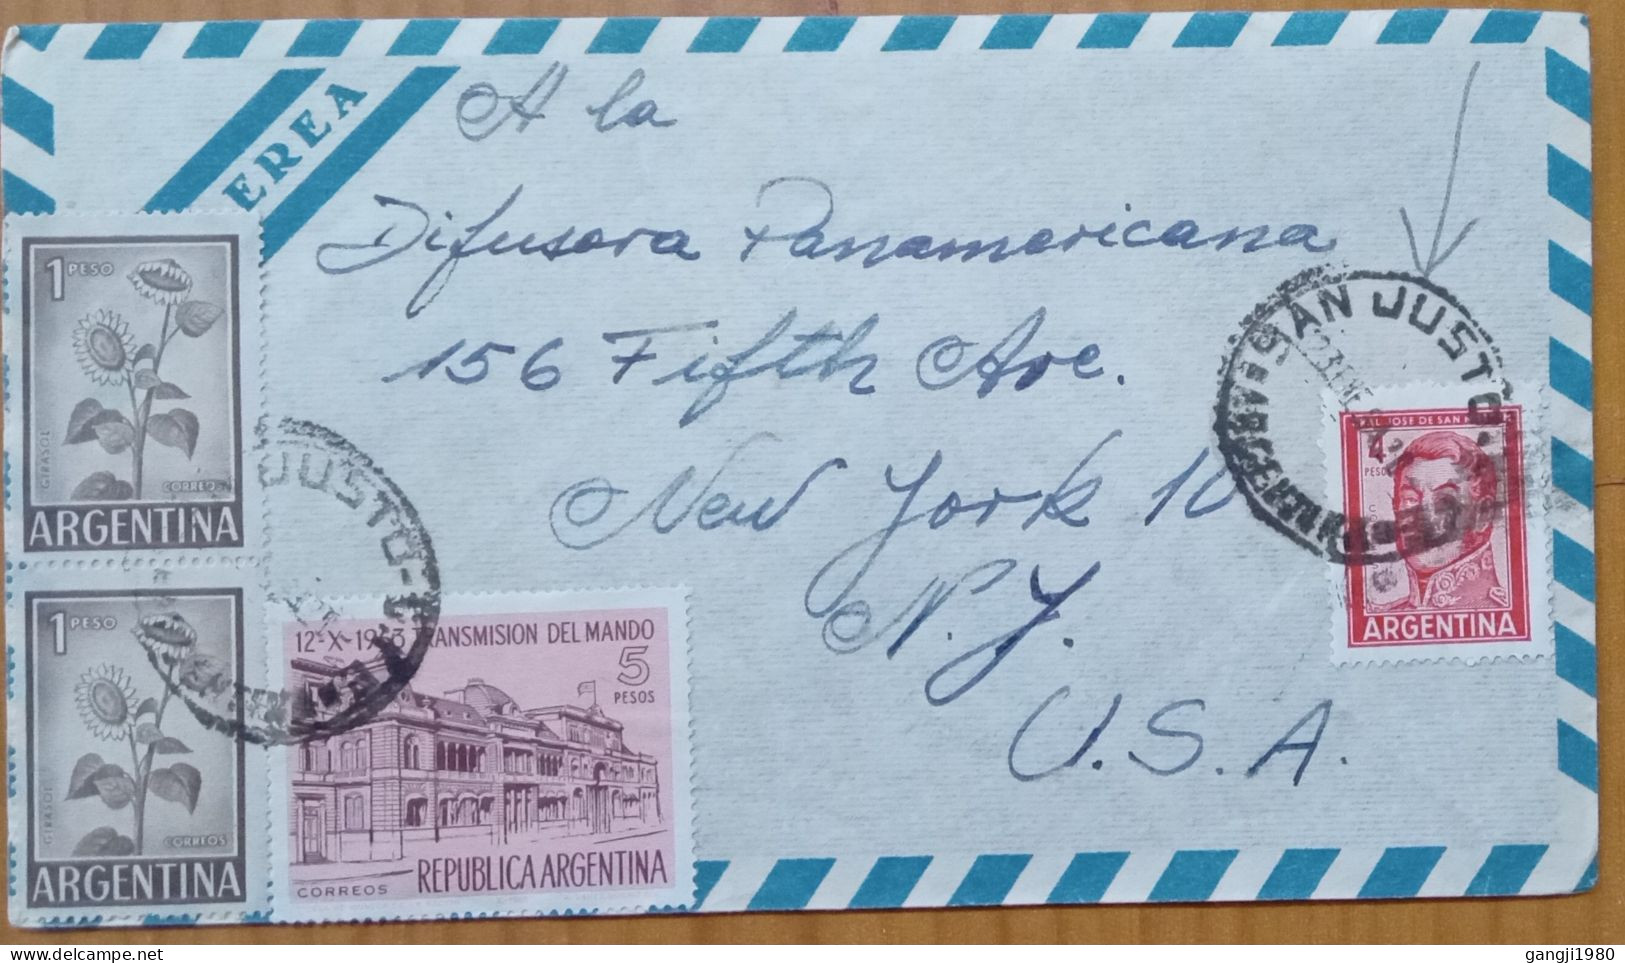 ARGENTINA 1964, COVER USED TO USA, 4 STAMP, SAN MARTIN,1963 GOVT. HOUSE BUILDING, SUNFLOWER PLANT, SAN JUSTO CITY CANCEL - Lettres & Documents